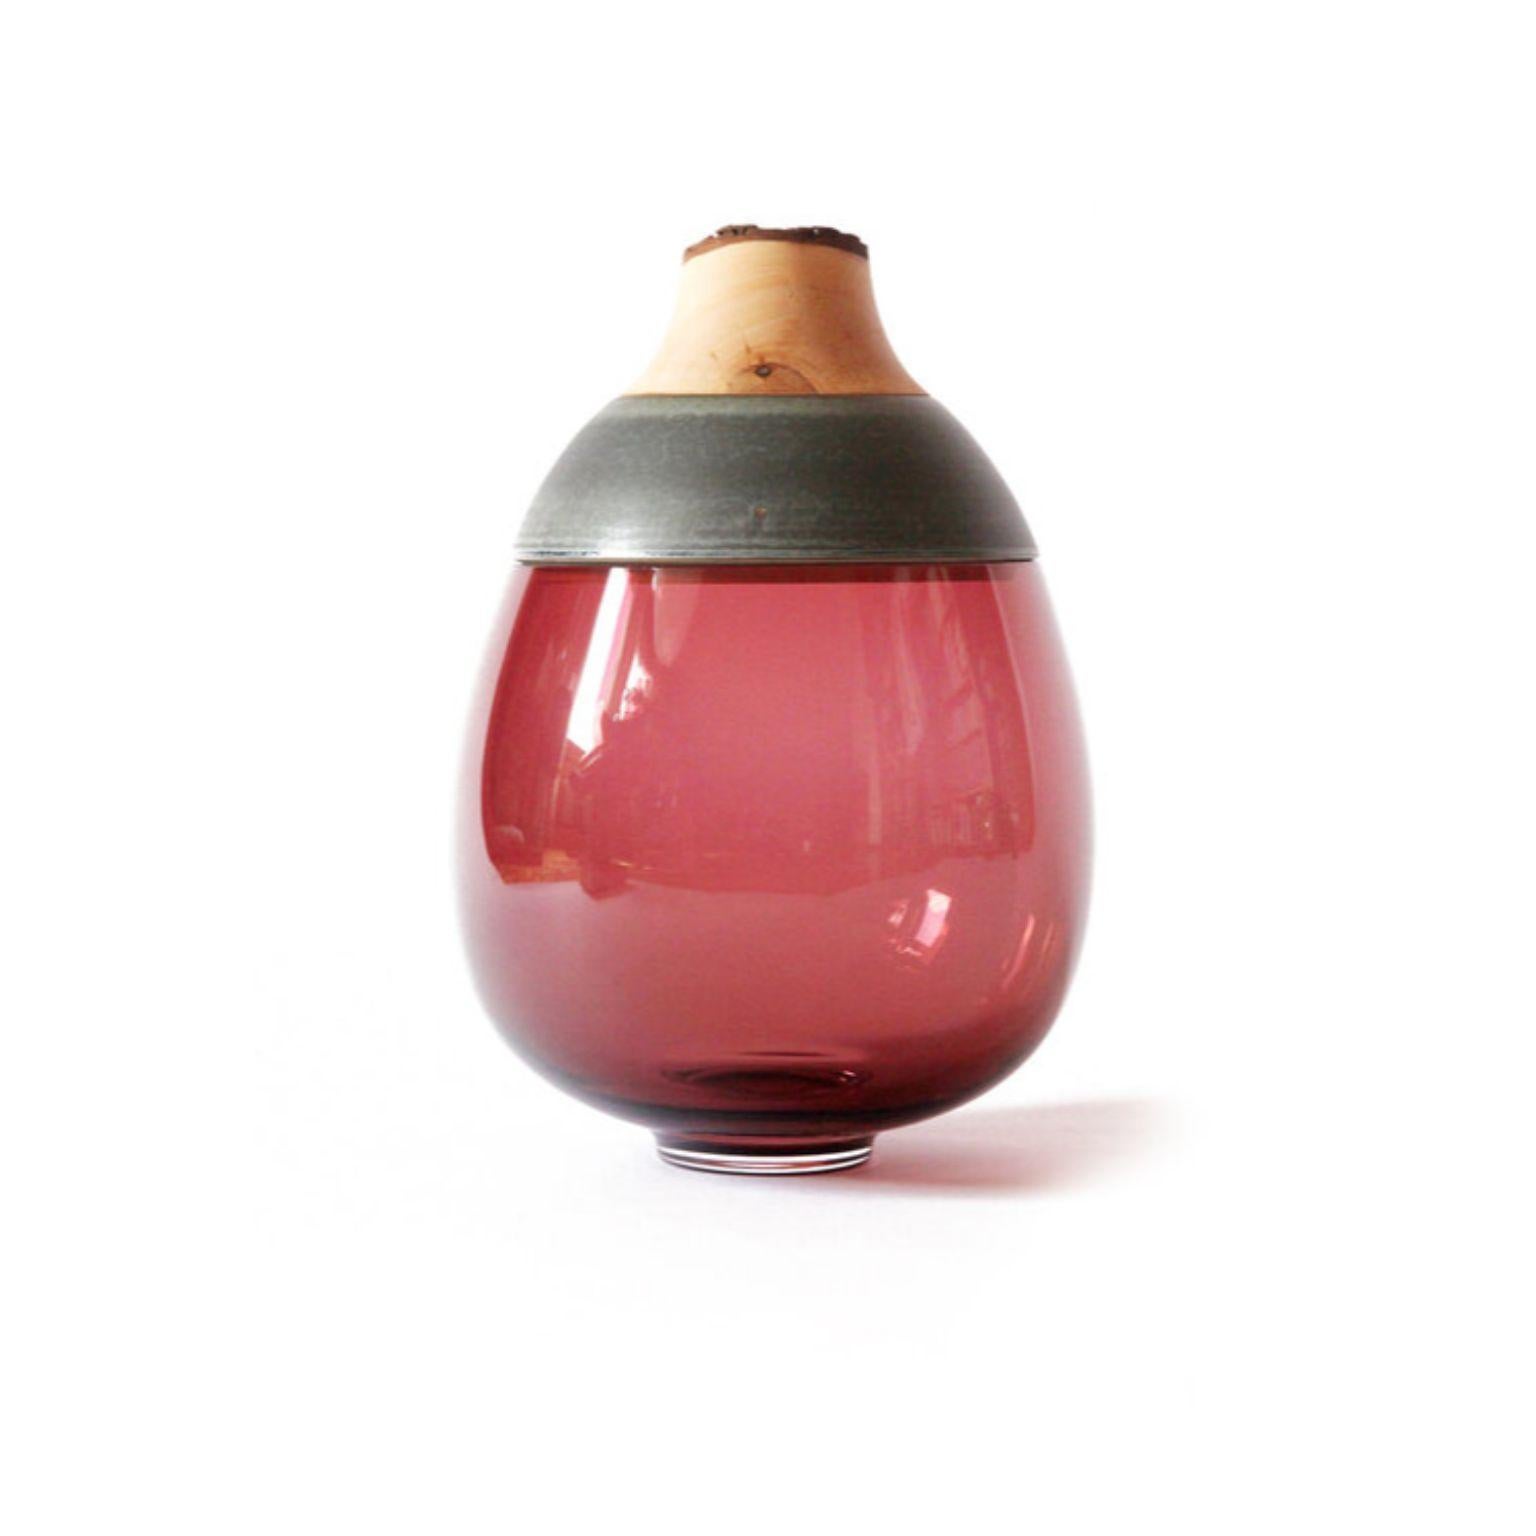 Organic Modern Sculpted Blown Glass and Ceramic Lilith Stacking Vessel, Pia Wüstenberg For Sale